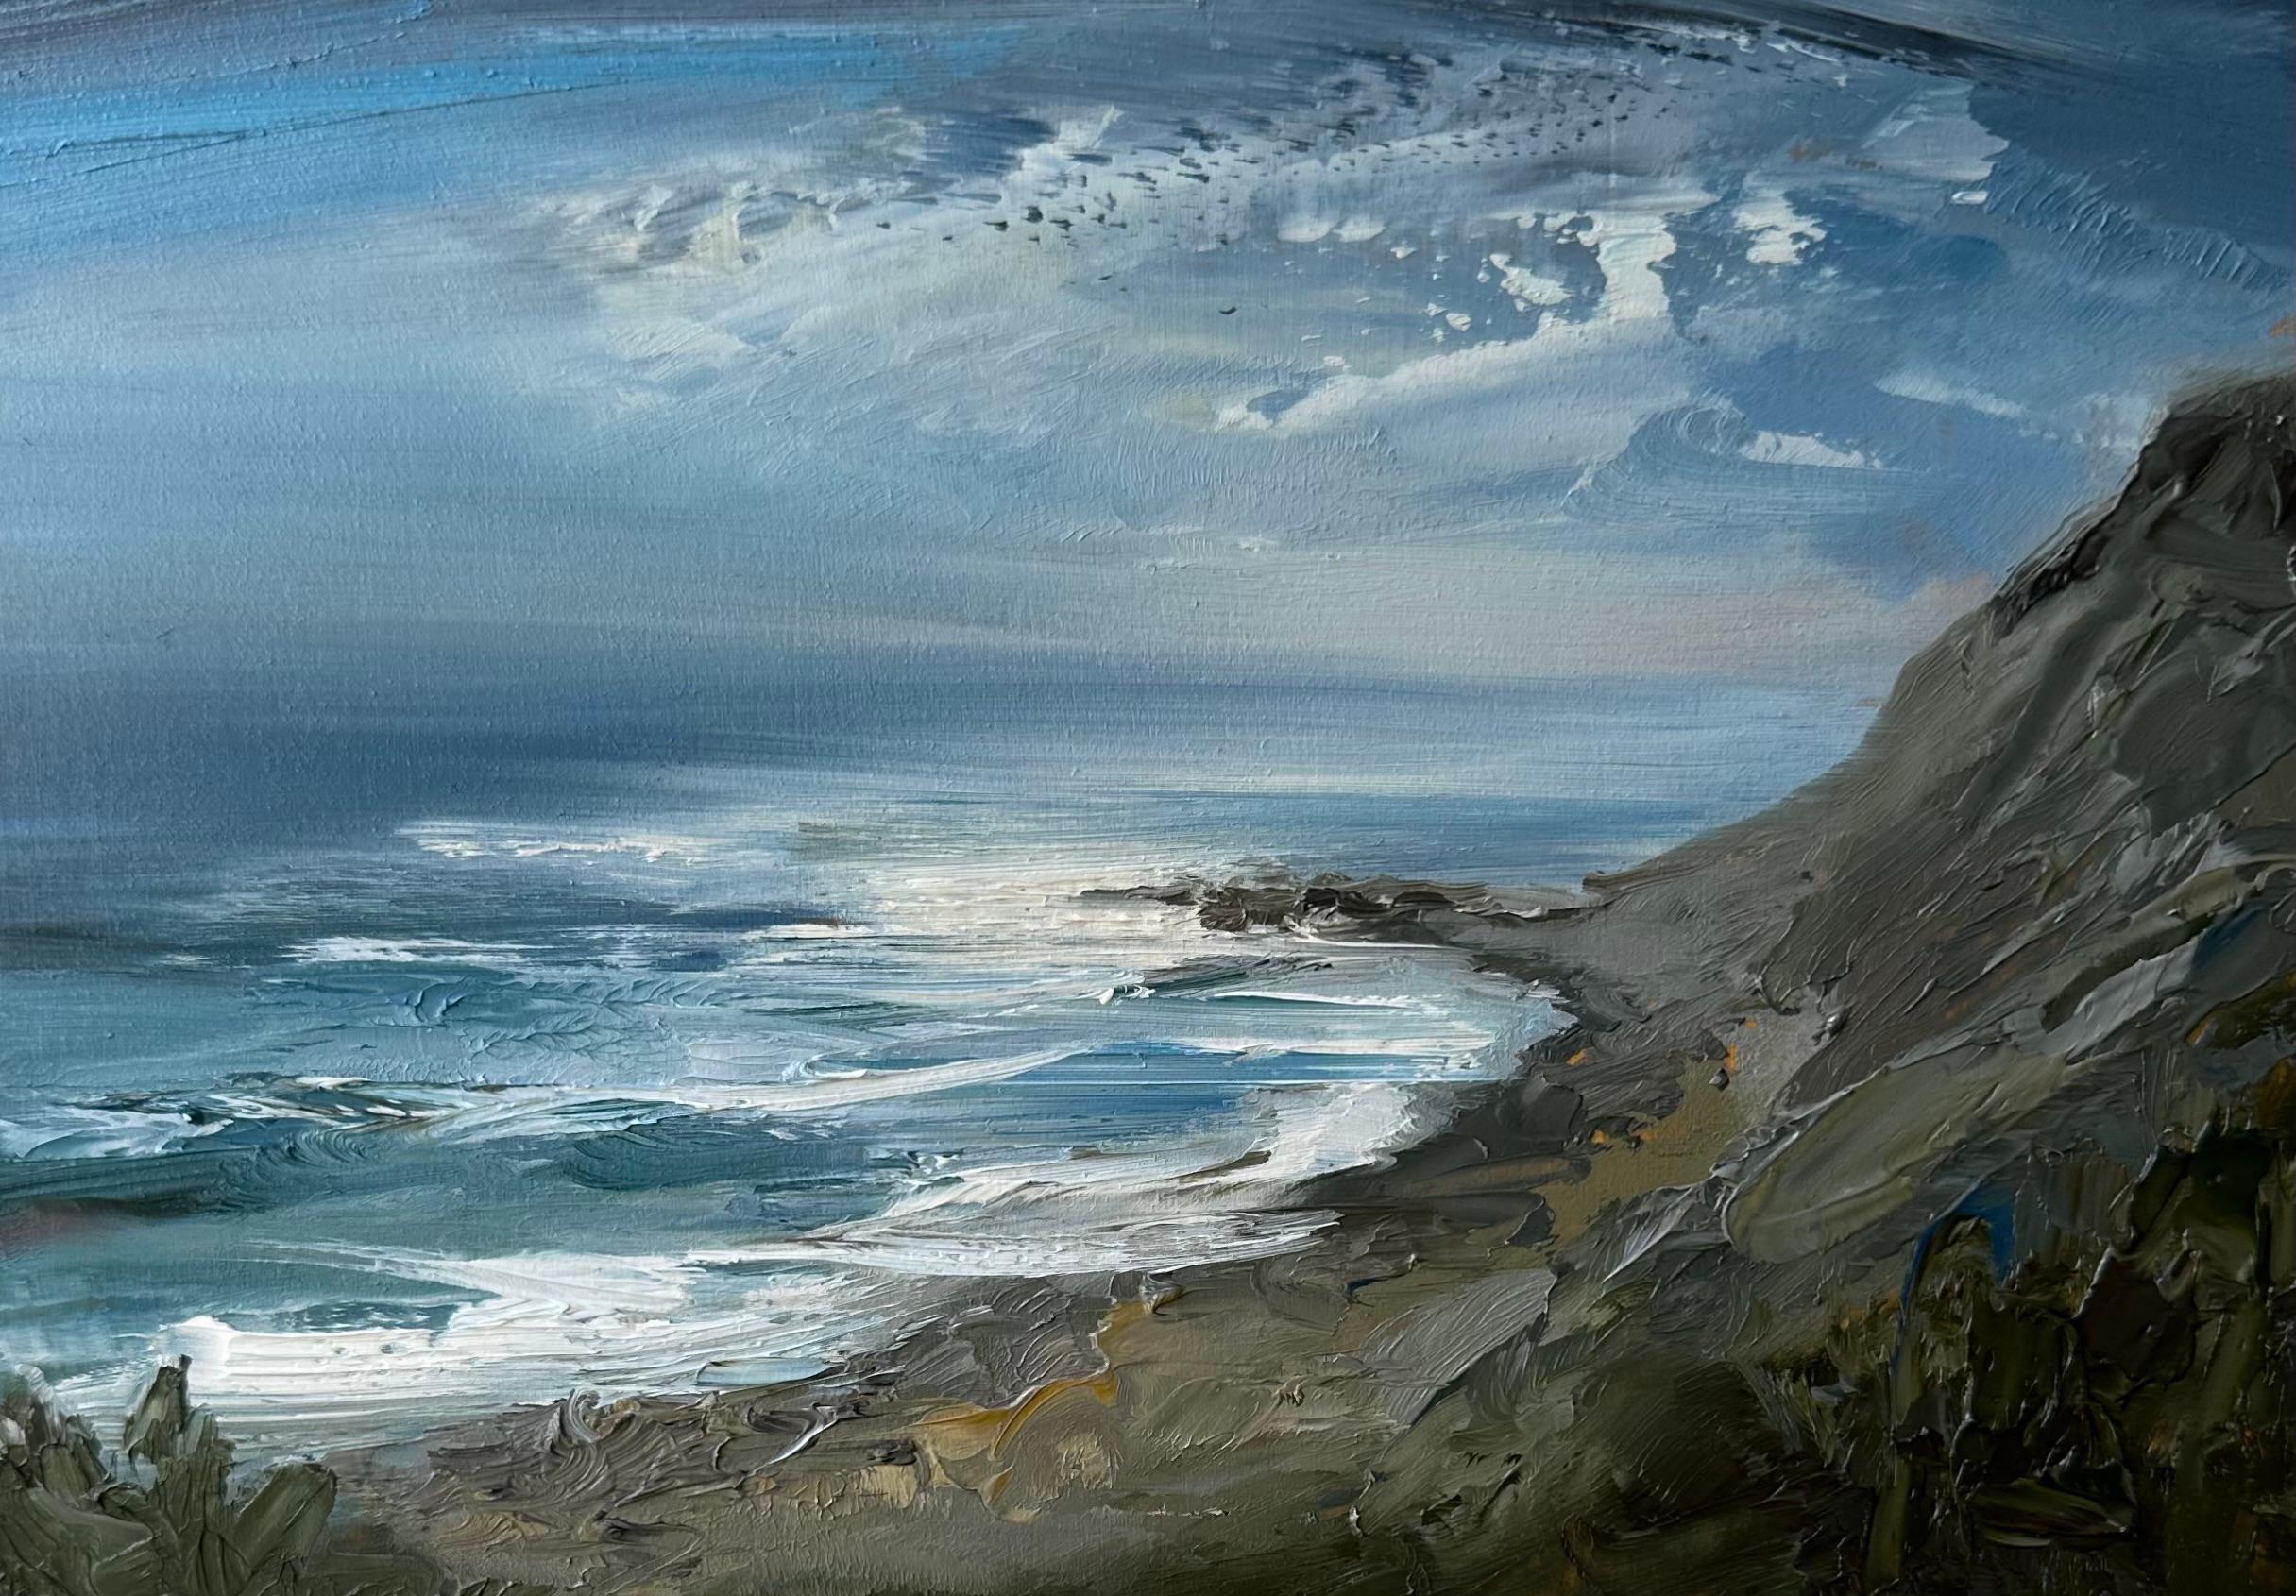 "Moonlit Bluff", a landscape oil painting with a picturesque shore view